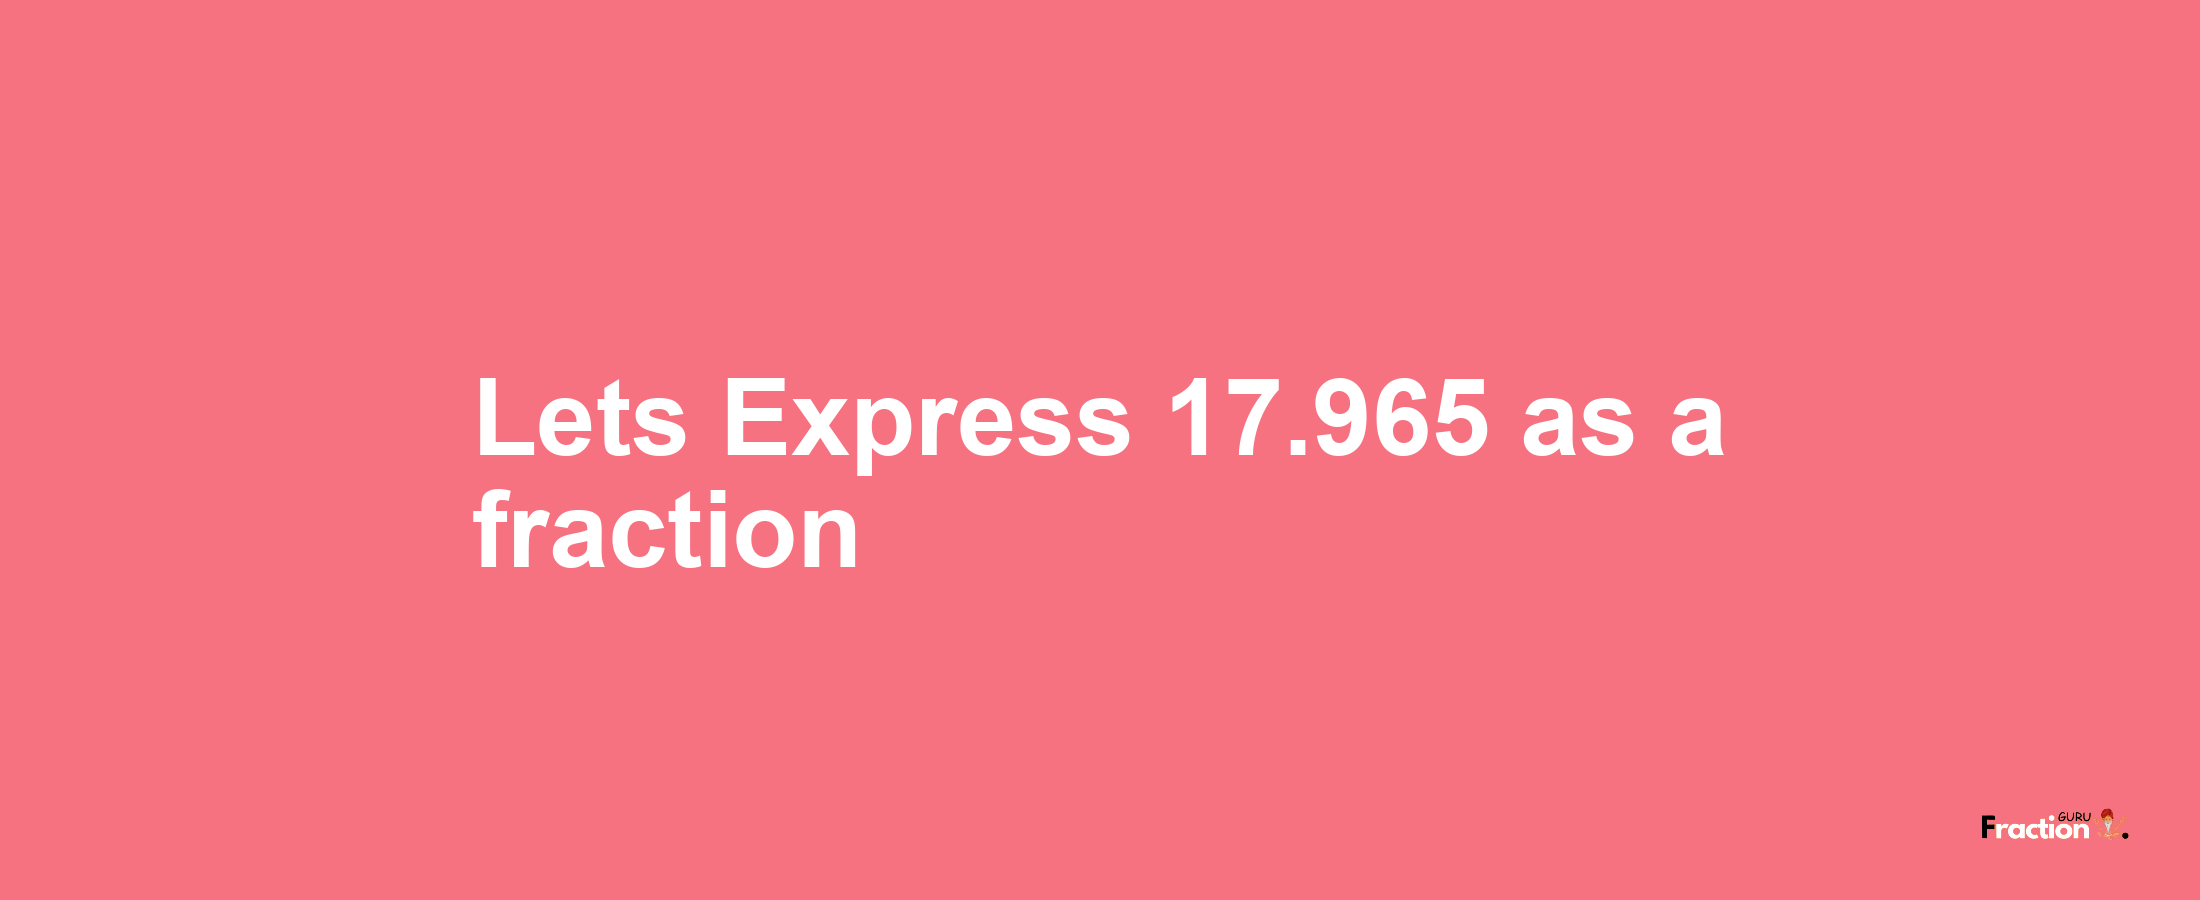 Lets Express 17.965 as afraction